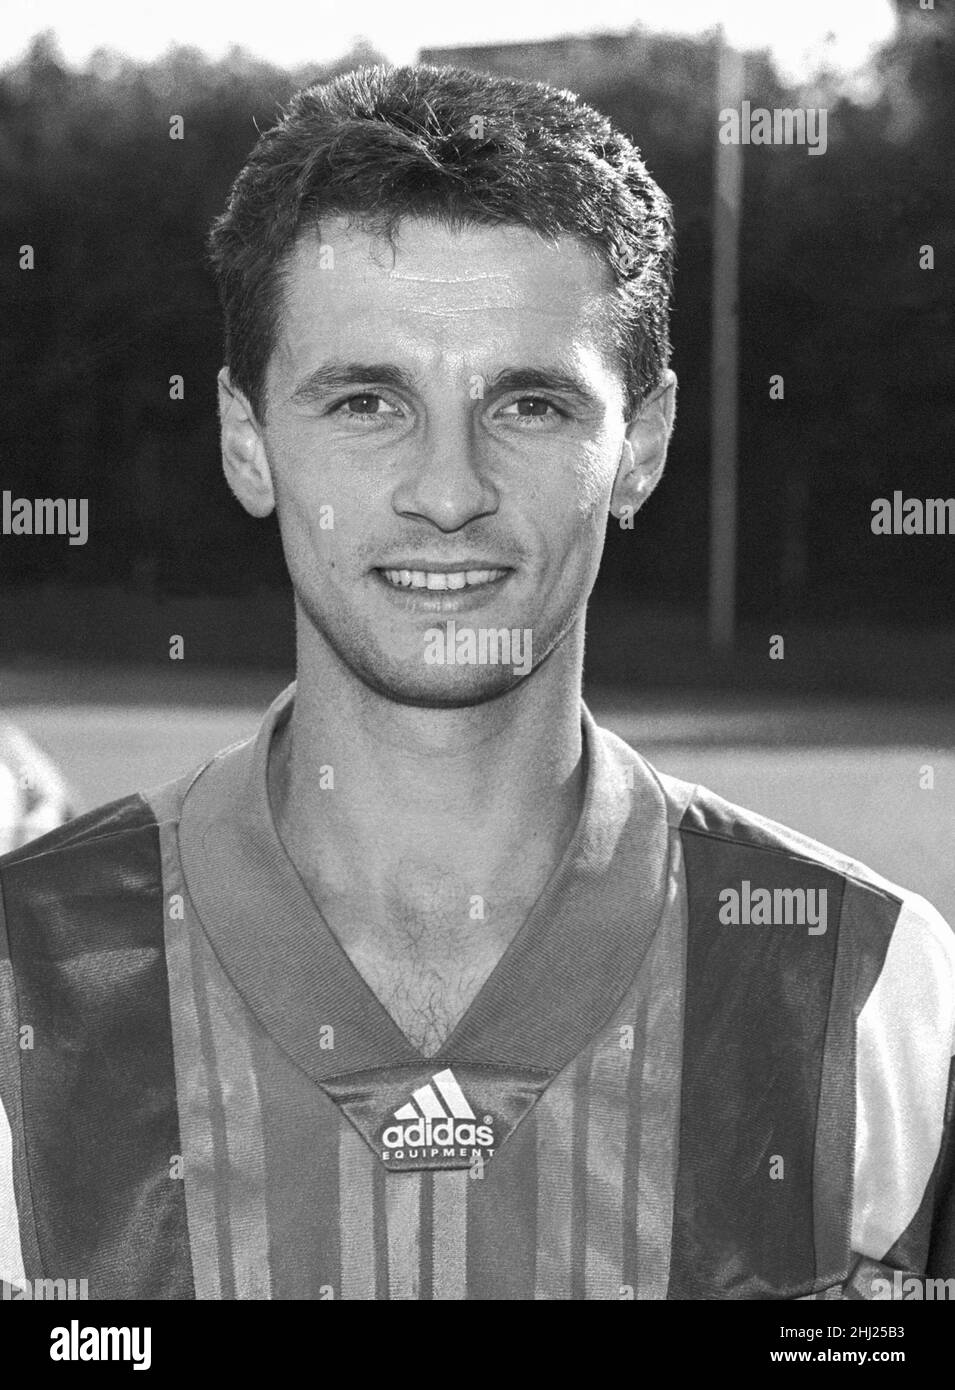 REMI GARDE Football Lyon and the French national team to European championship in Sweden 1992 Stock Photo